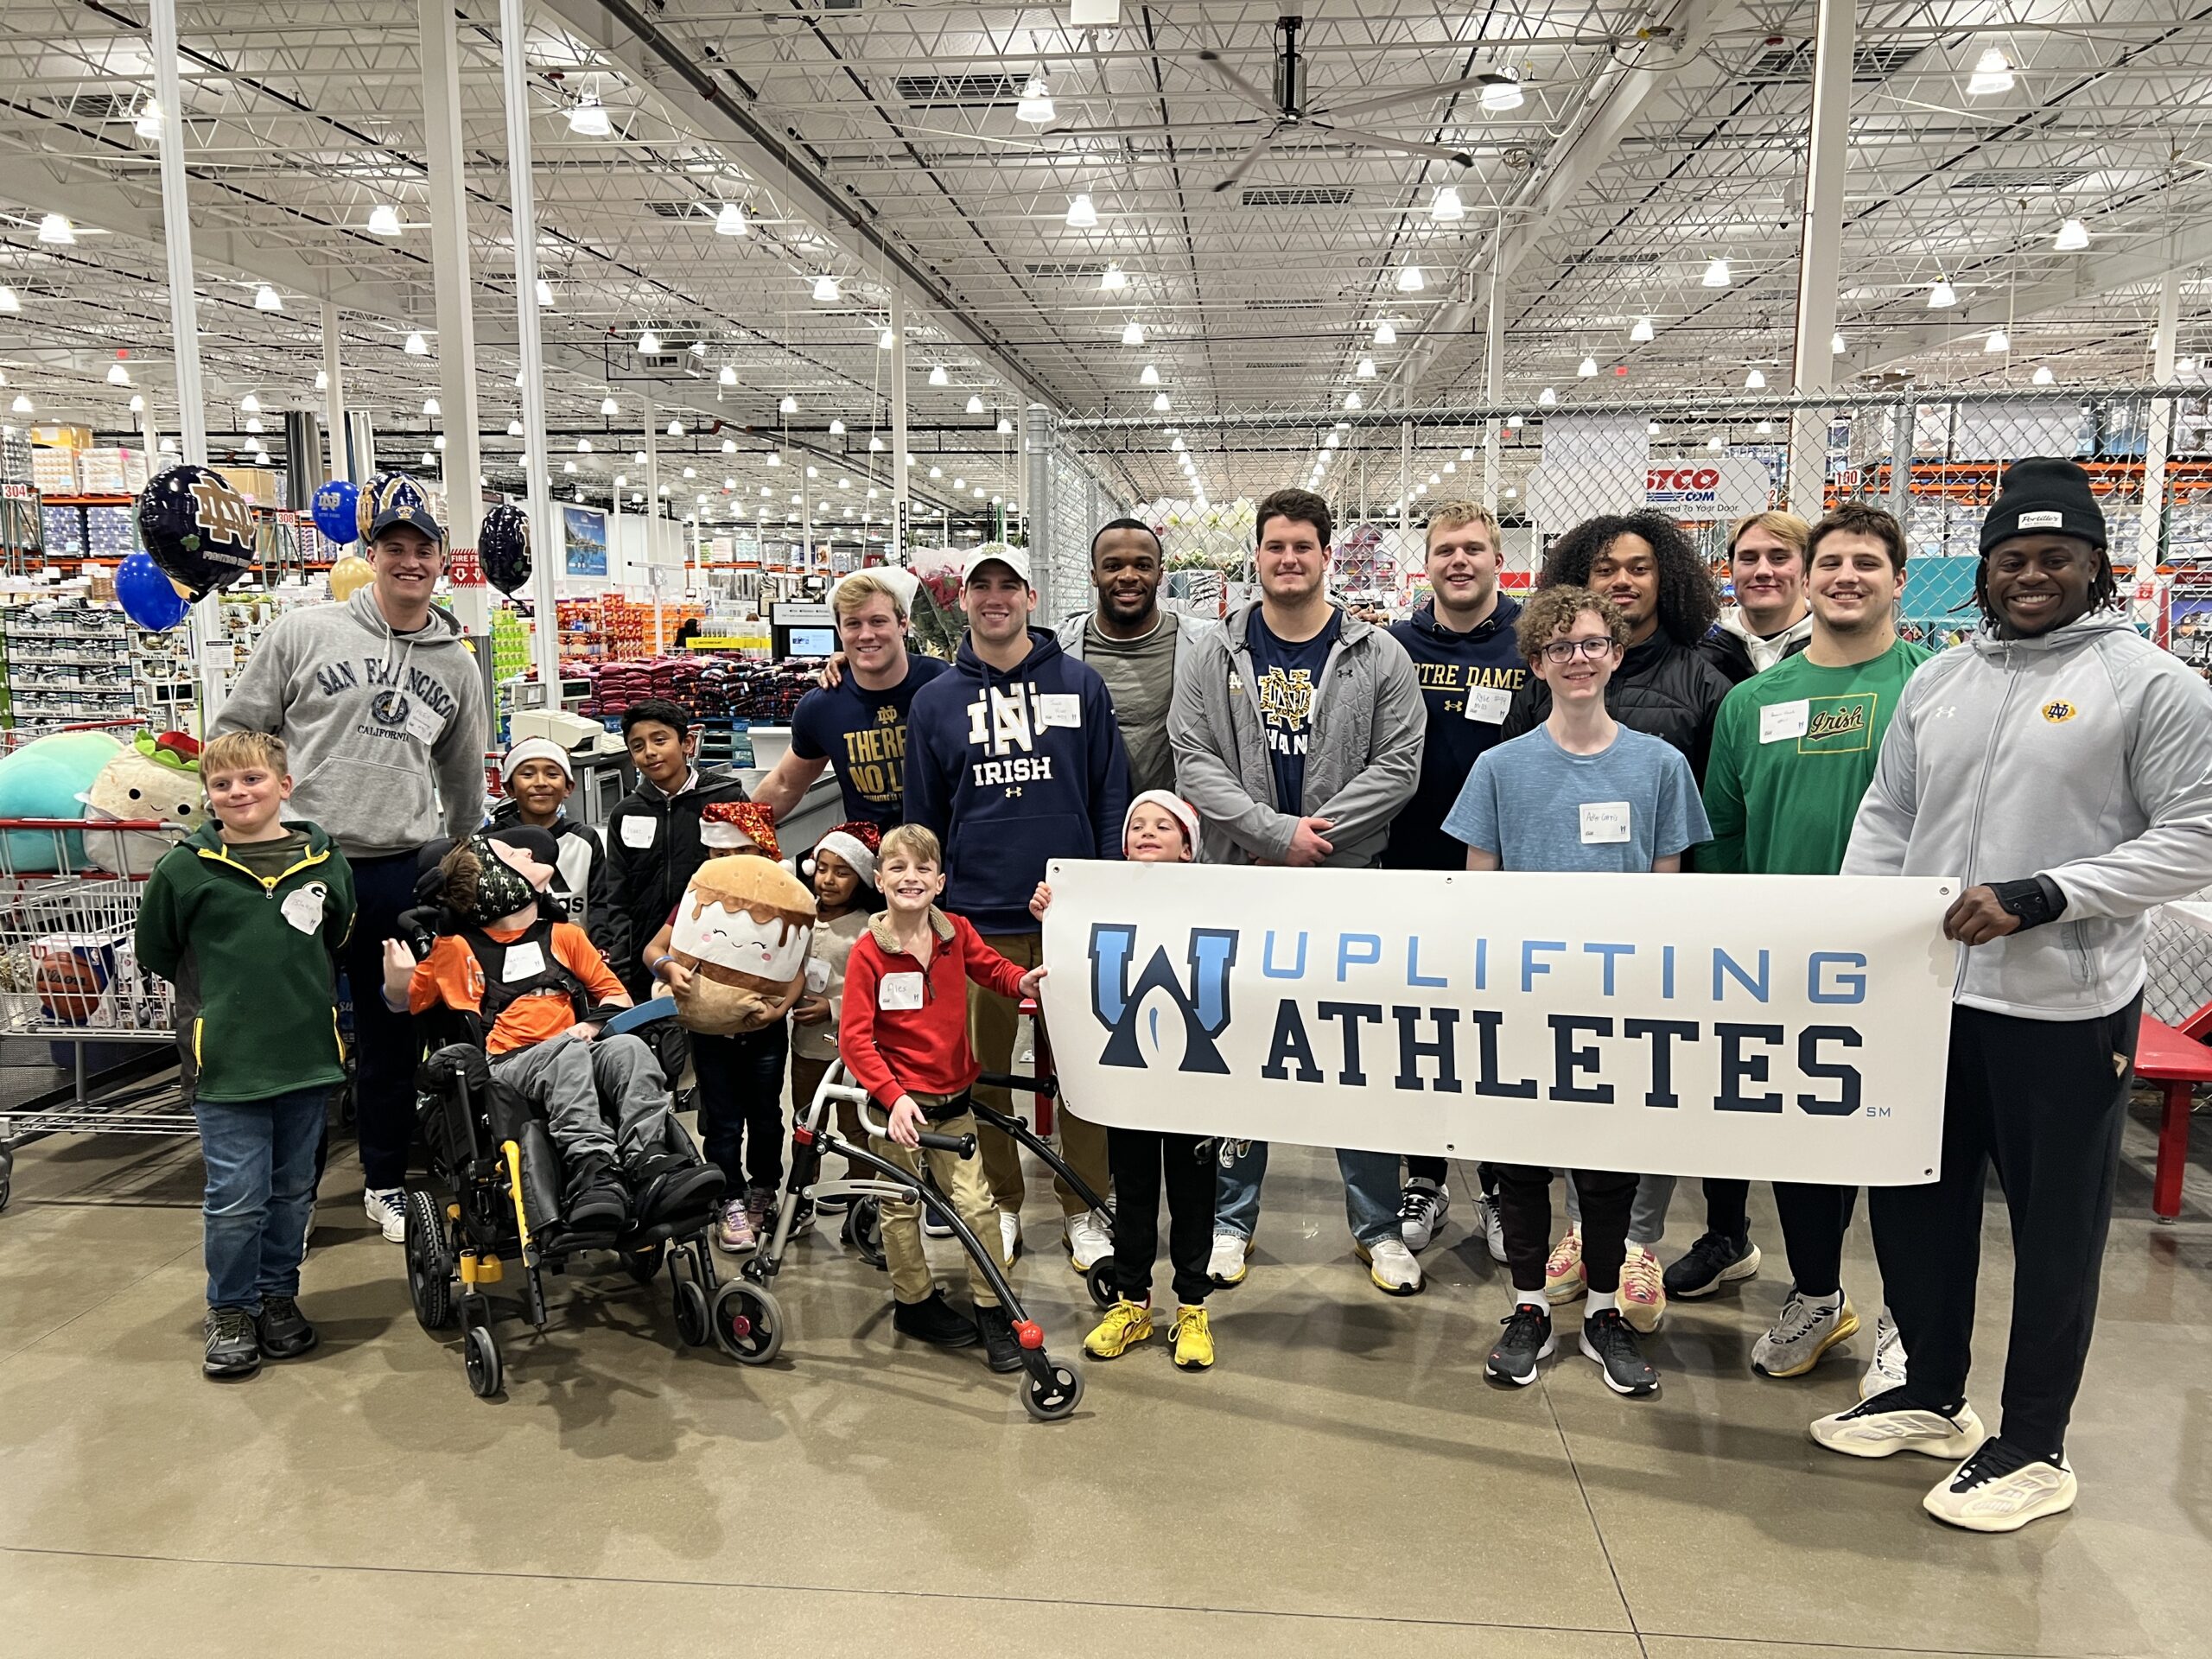 Notre Dame Football Holiday Shopping Uplifting Experience 2022